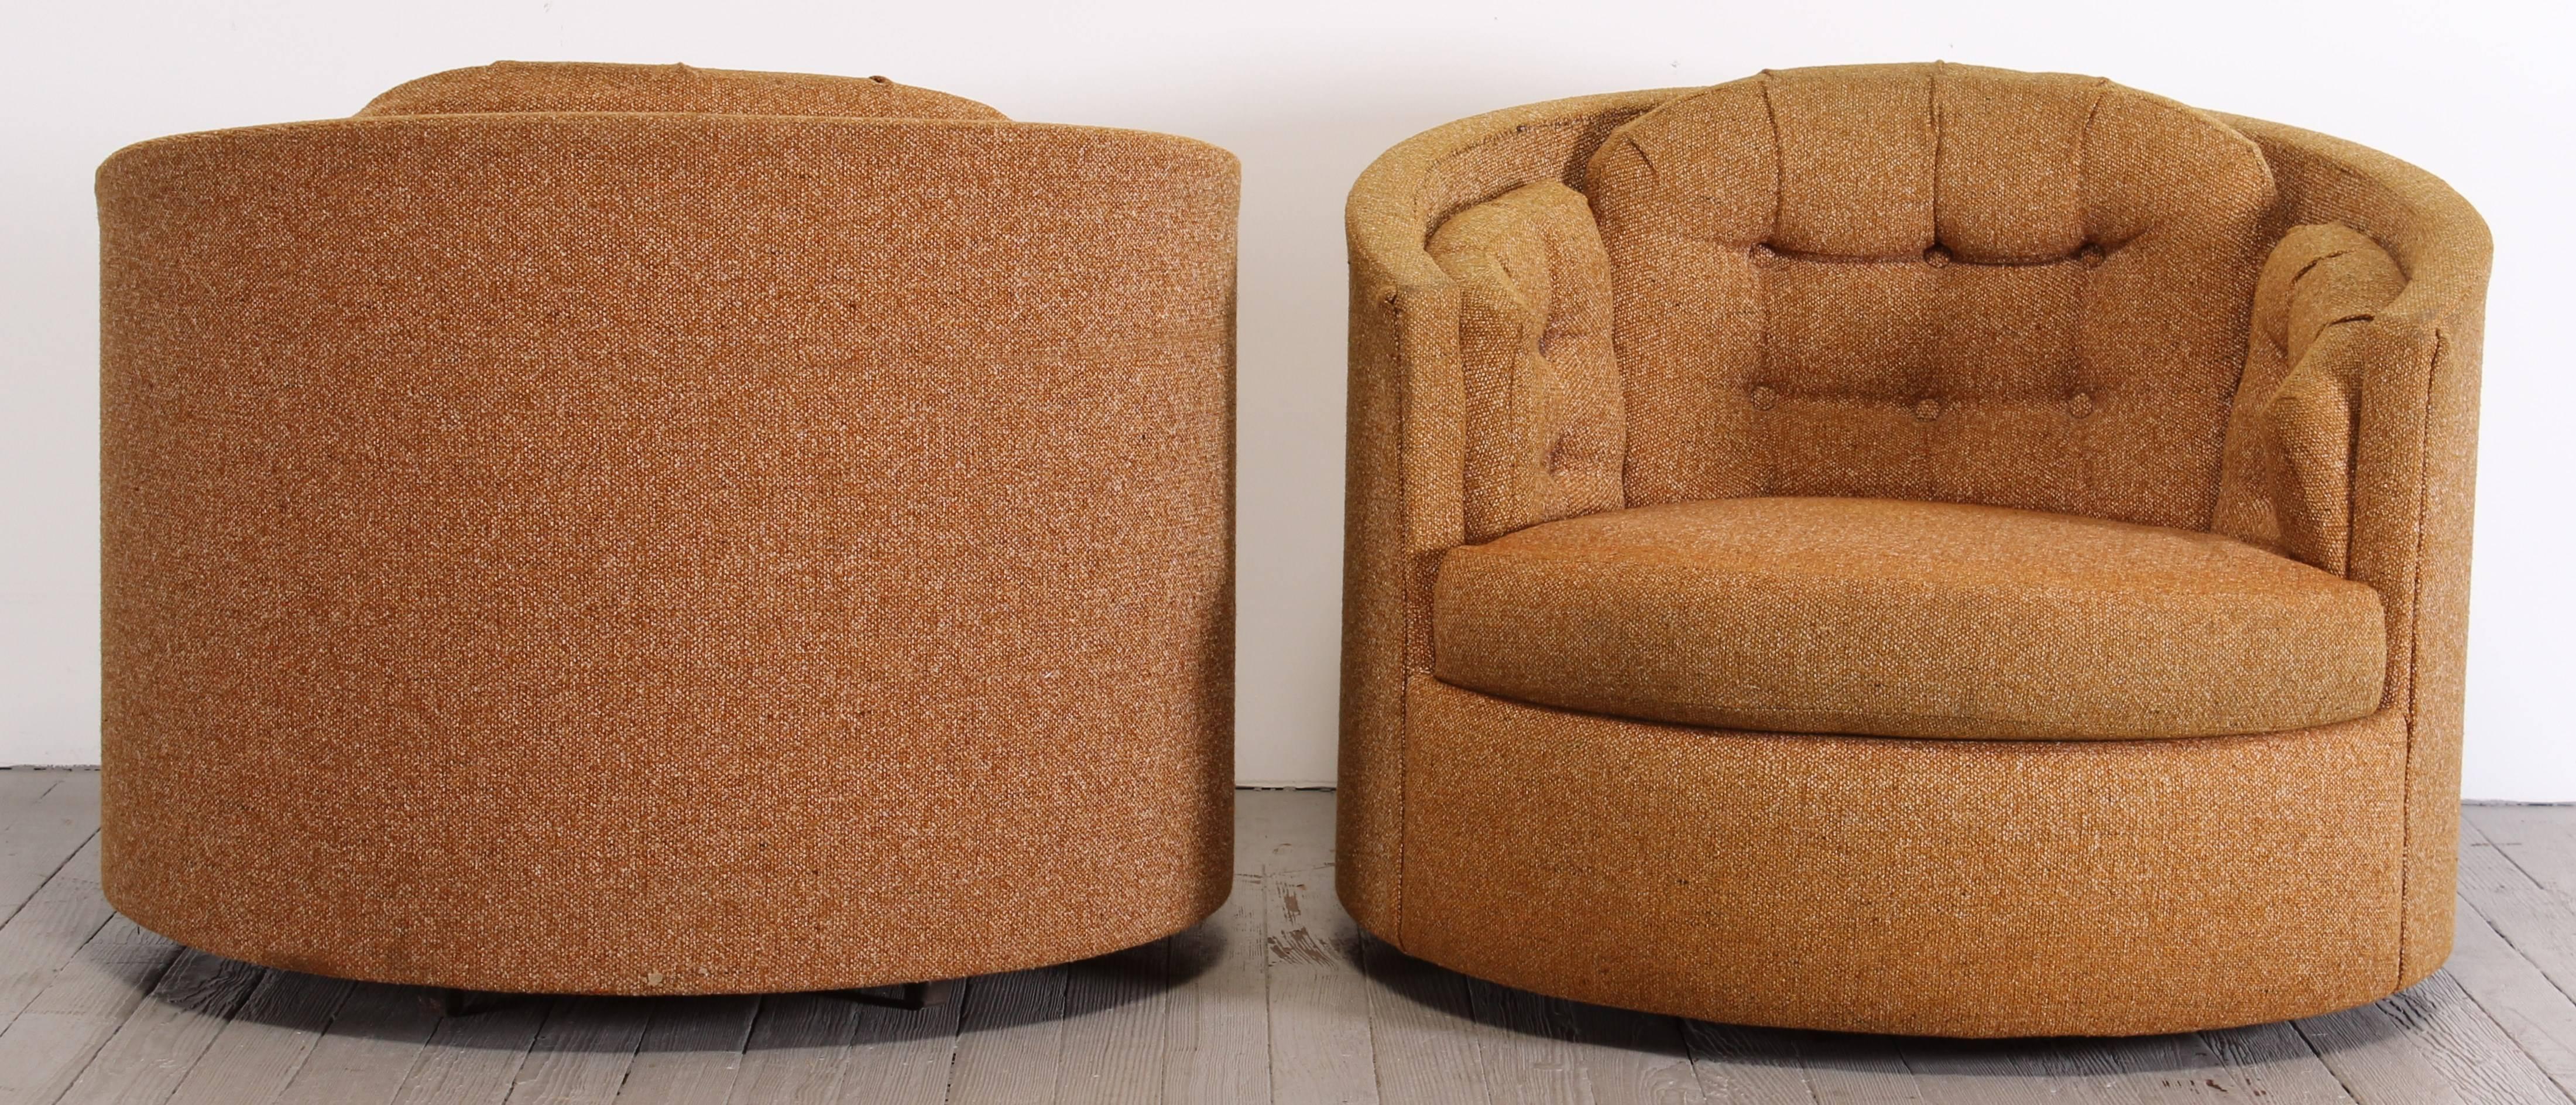 Pair of swiveling lounge chairs in the style of Milo Baughman. New York City delivery would be $249.